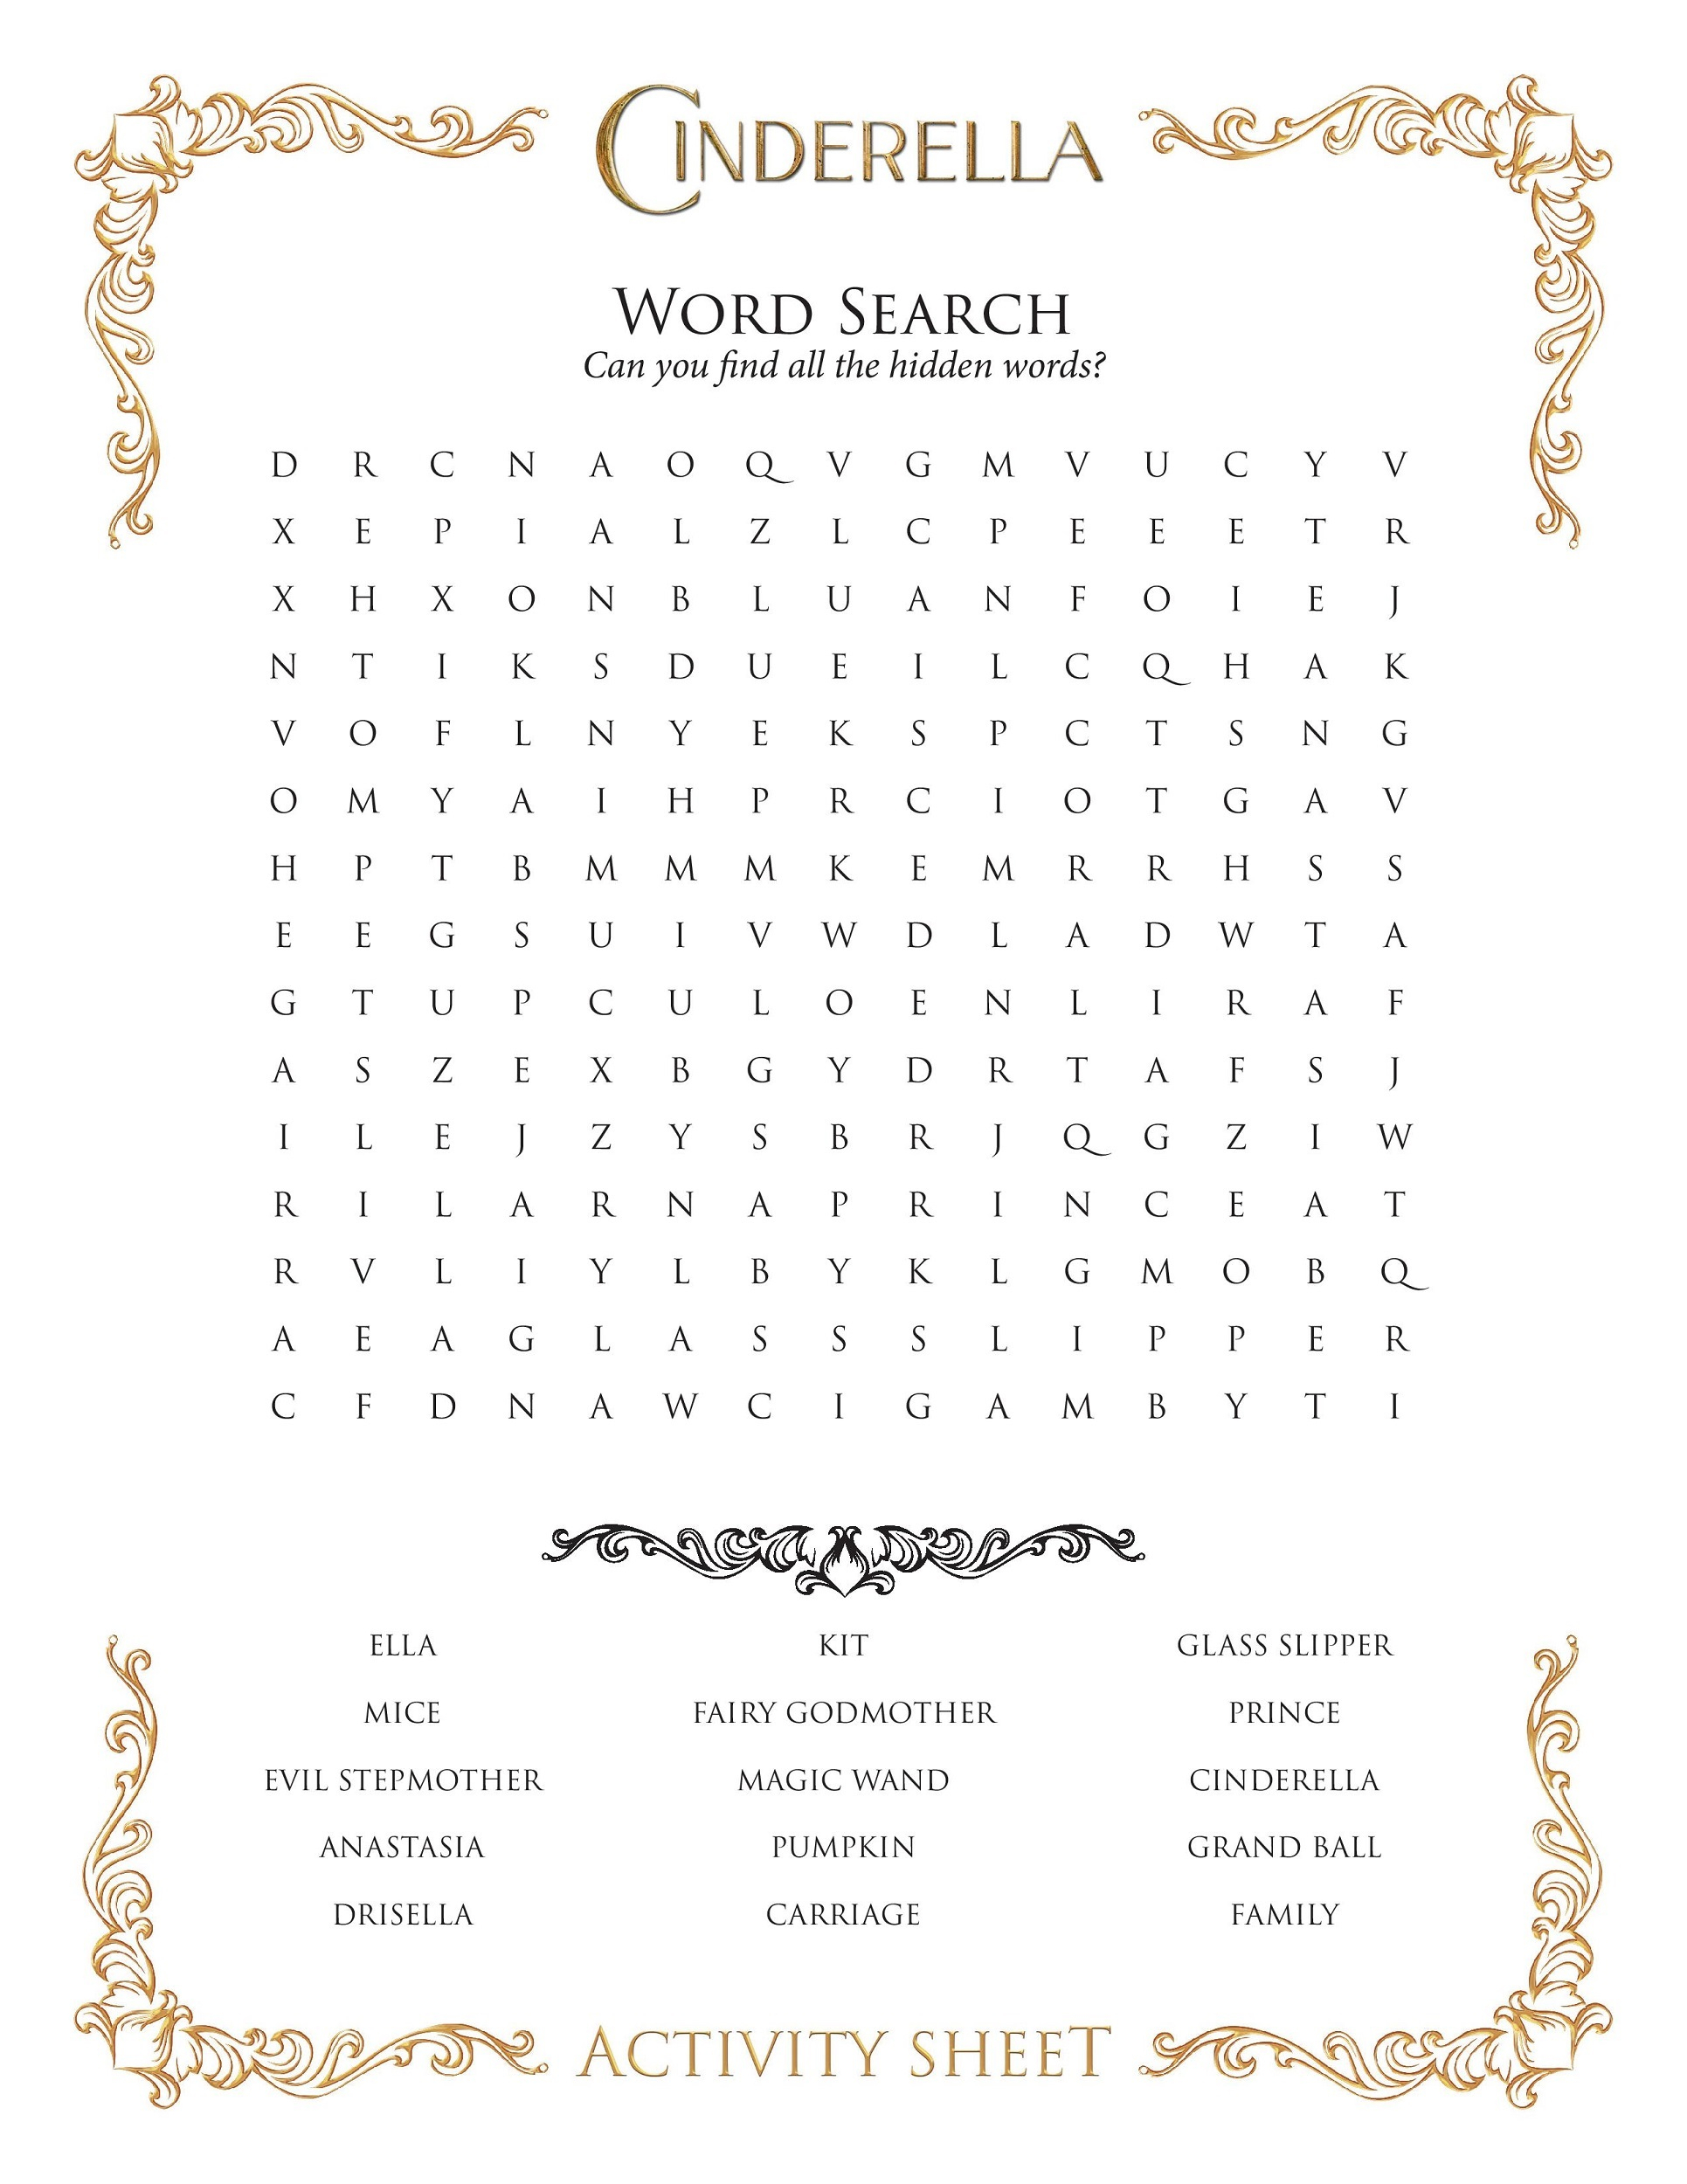 15 Free Disney Word Searches | Kittybabylove throughout Disney Princess Word Search